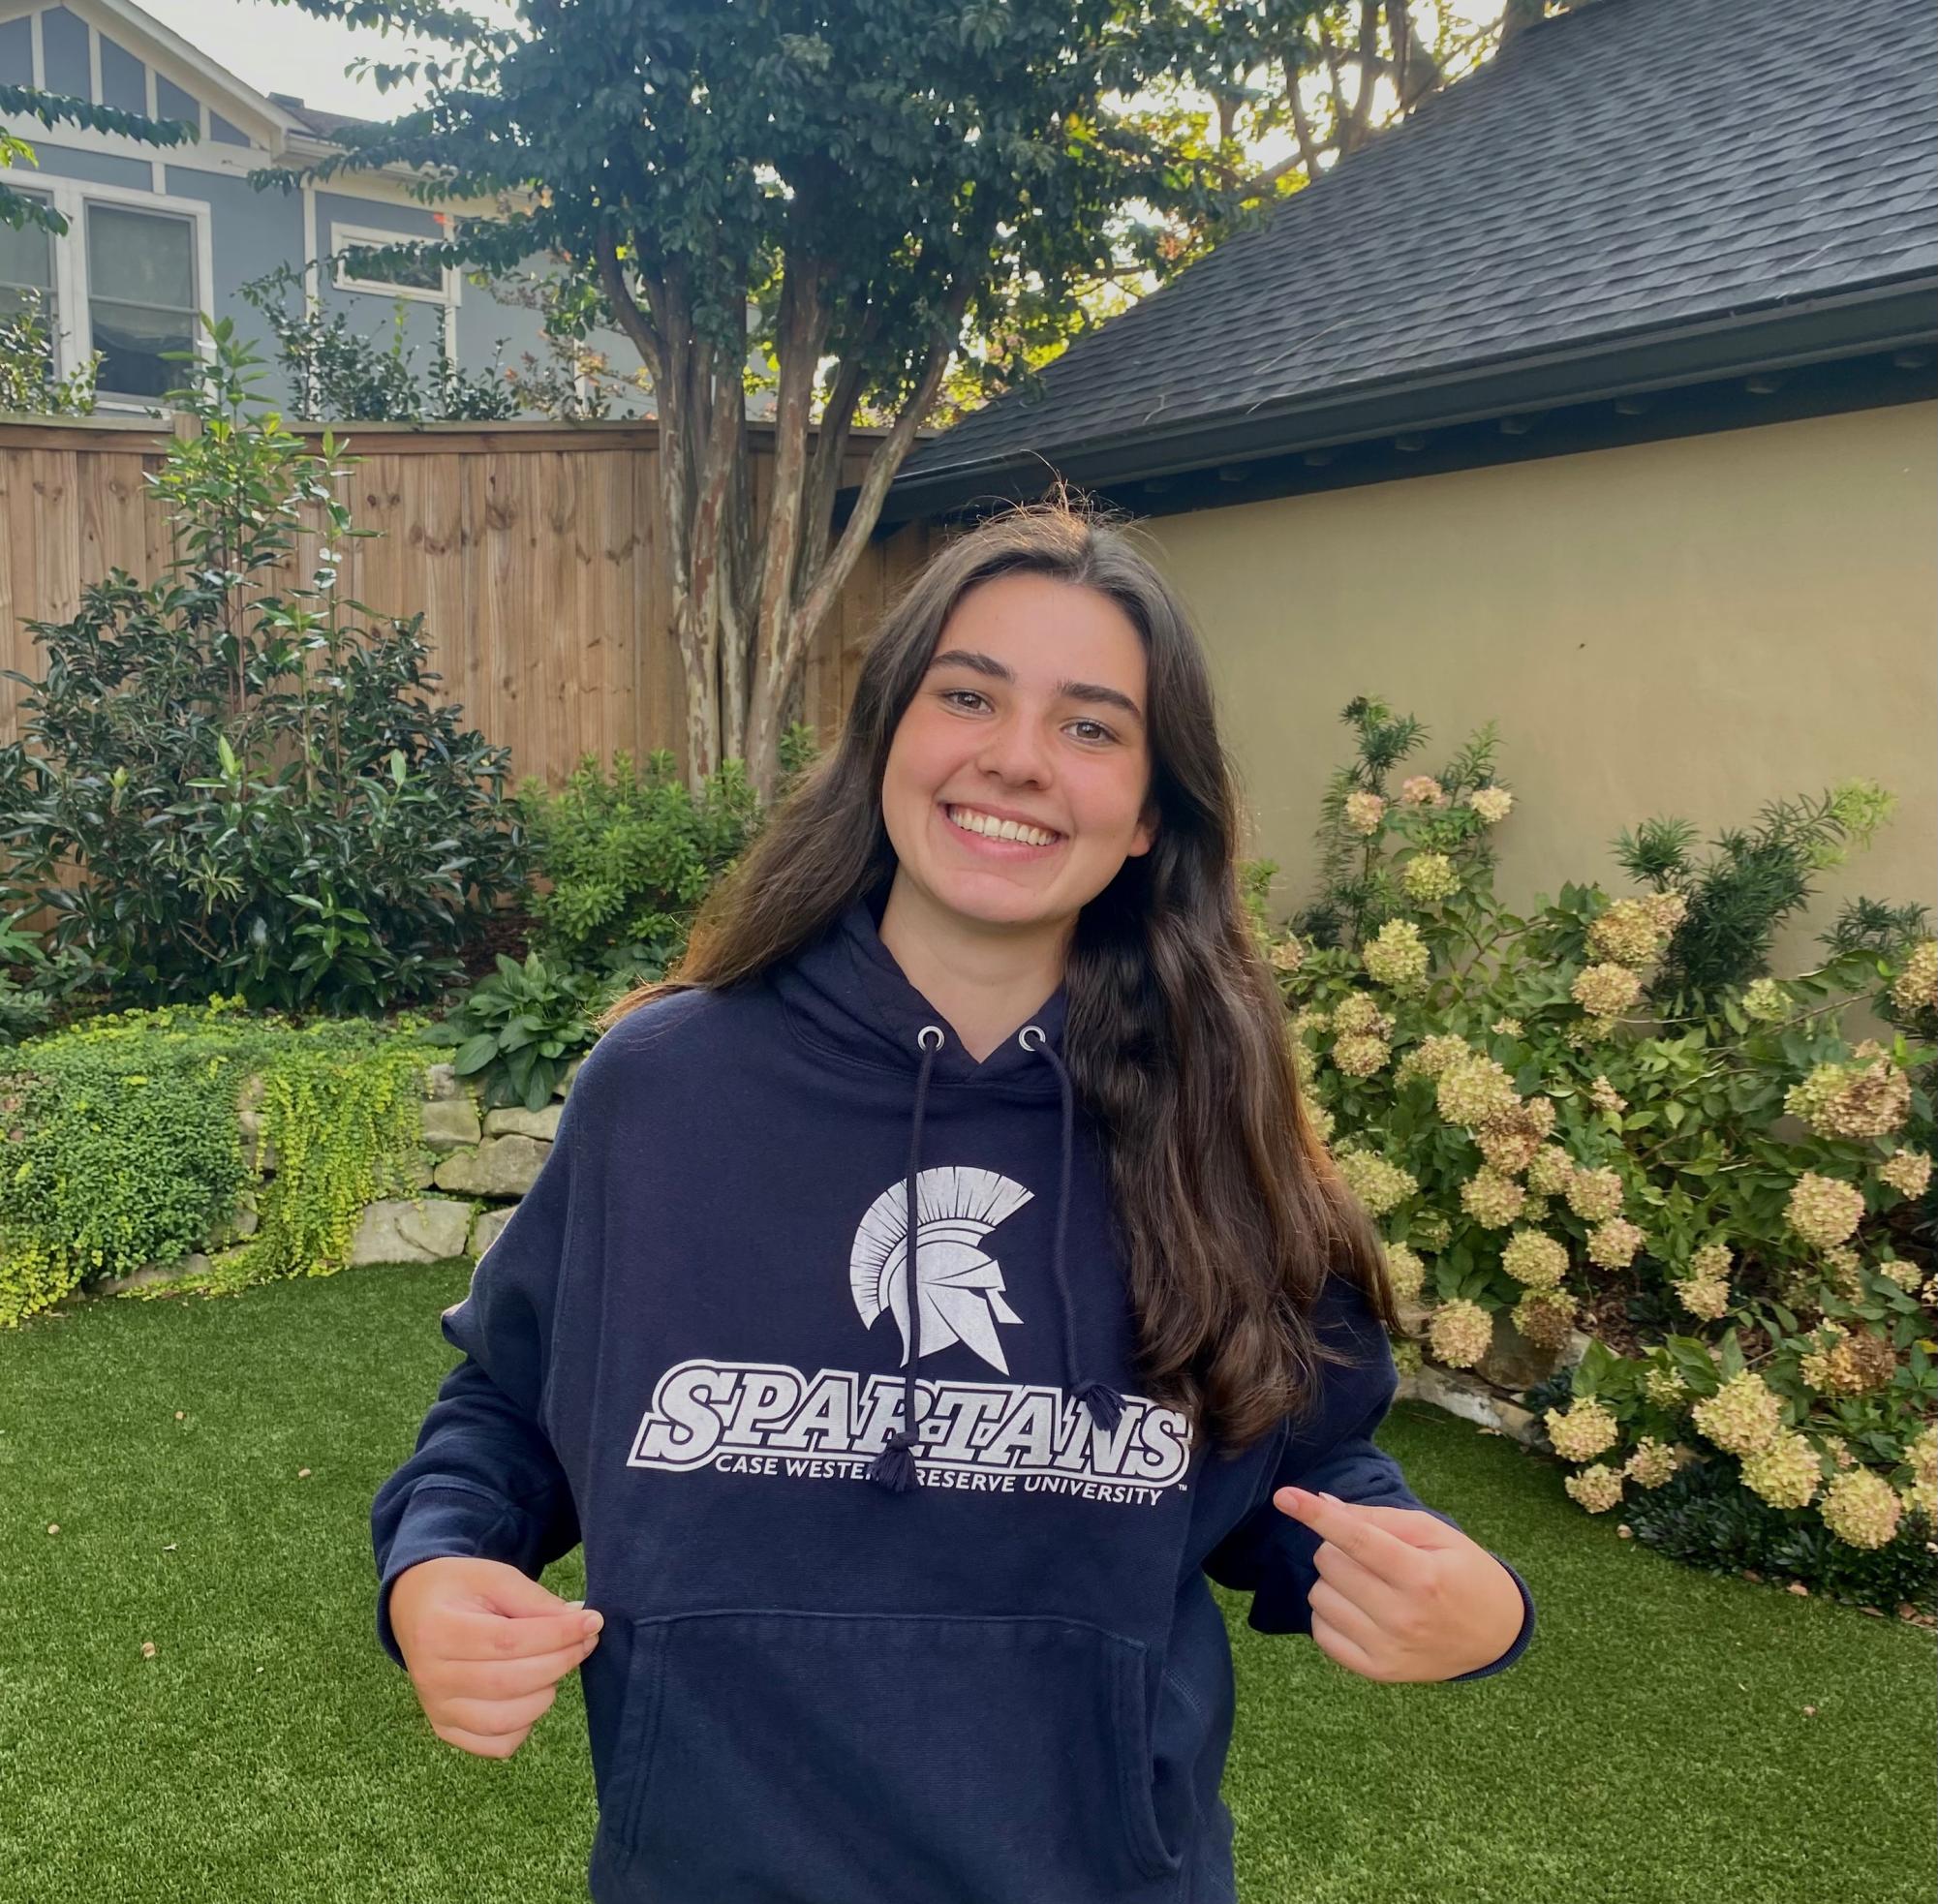 Senior Ellie Palaian committed to Case Western Reserve University early on in her senior year. Palaian has been a four year starter for the Knights and served as co-captain her junior and senior seasons. (Courtesy of Ellie Palaian)